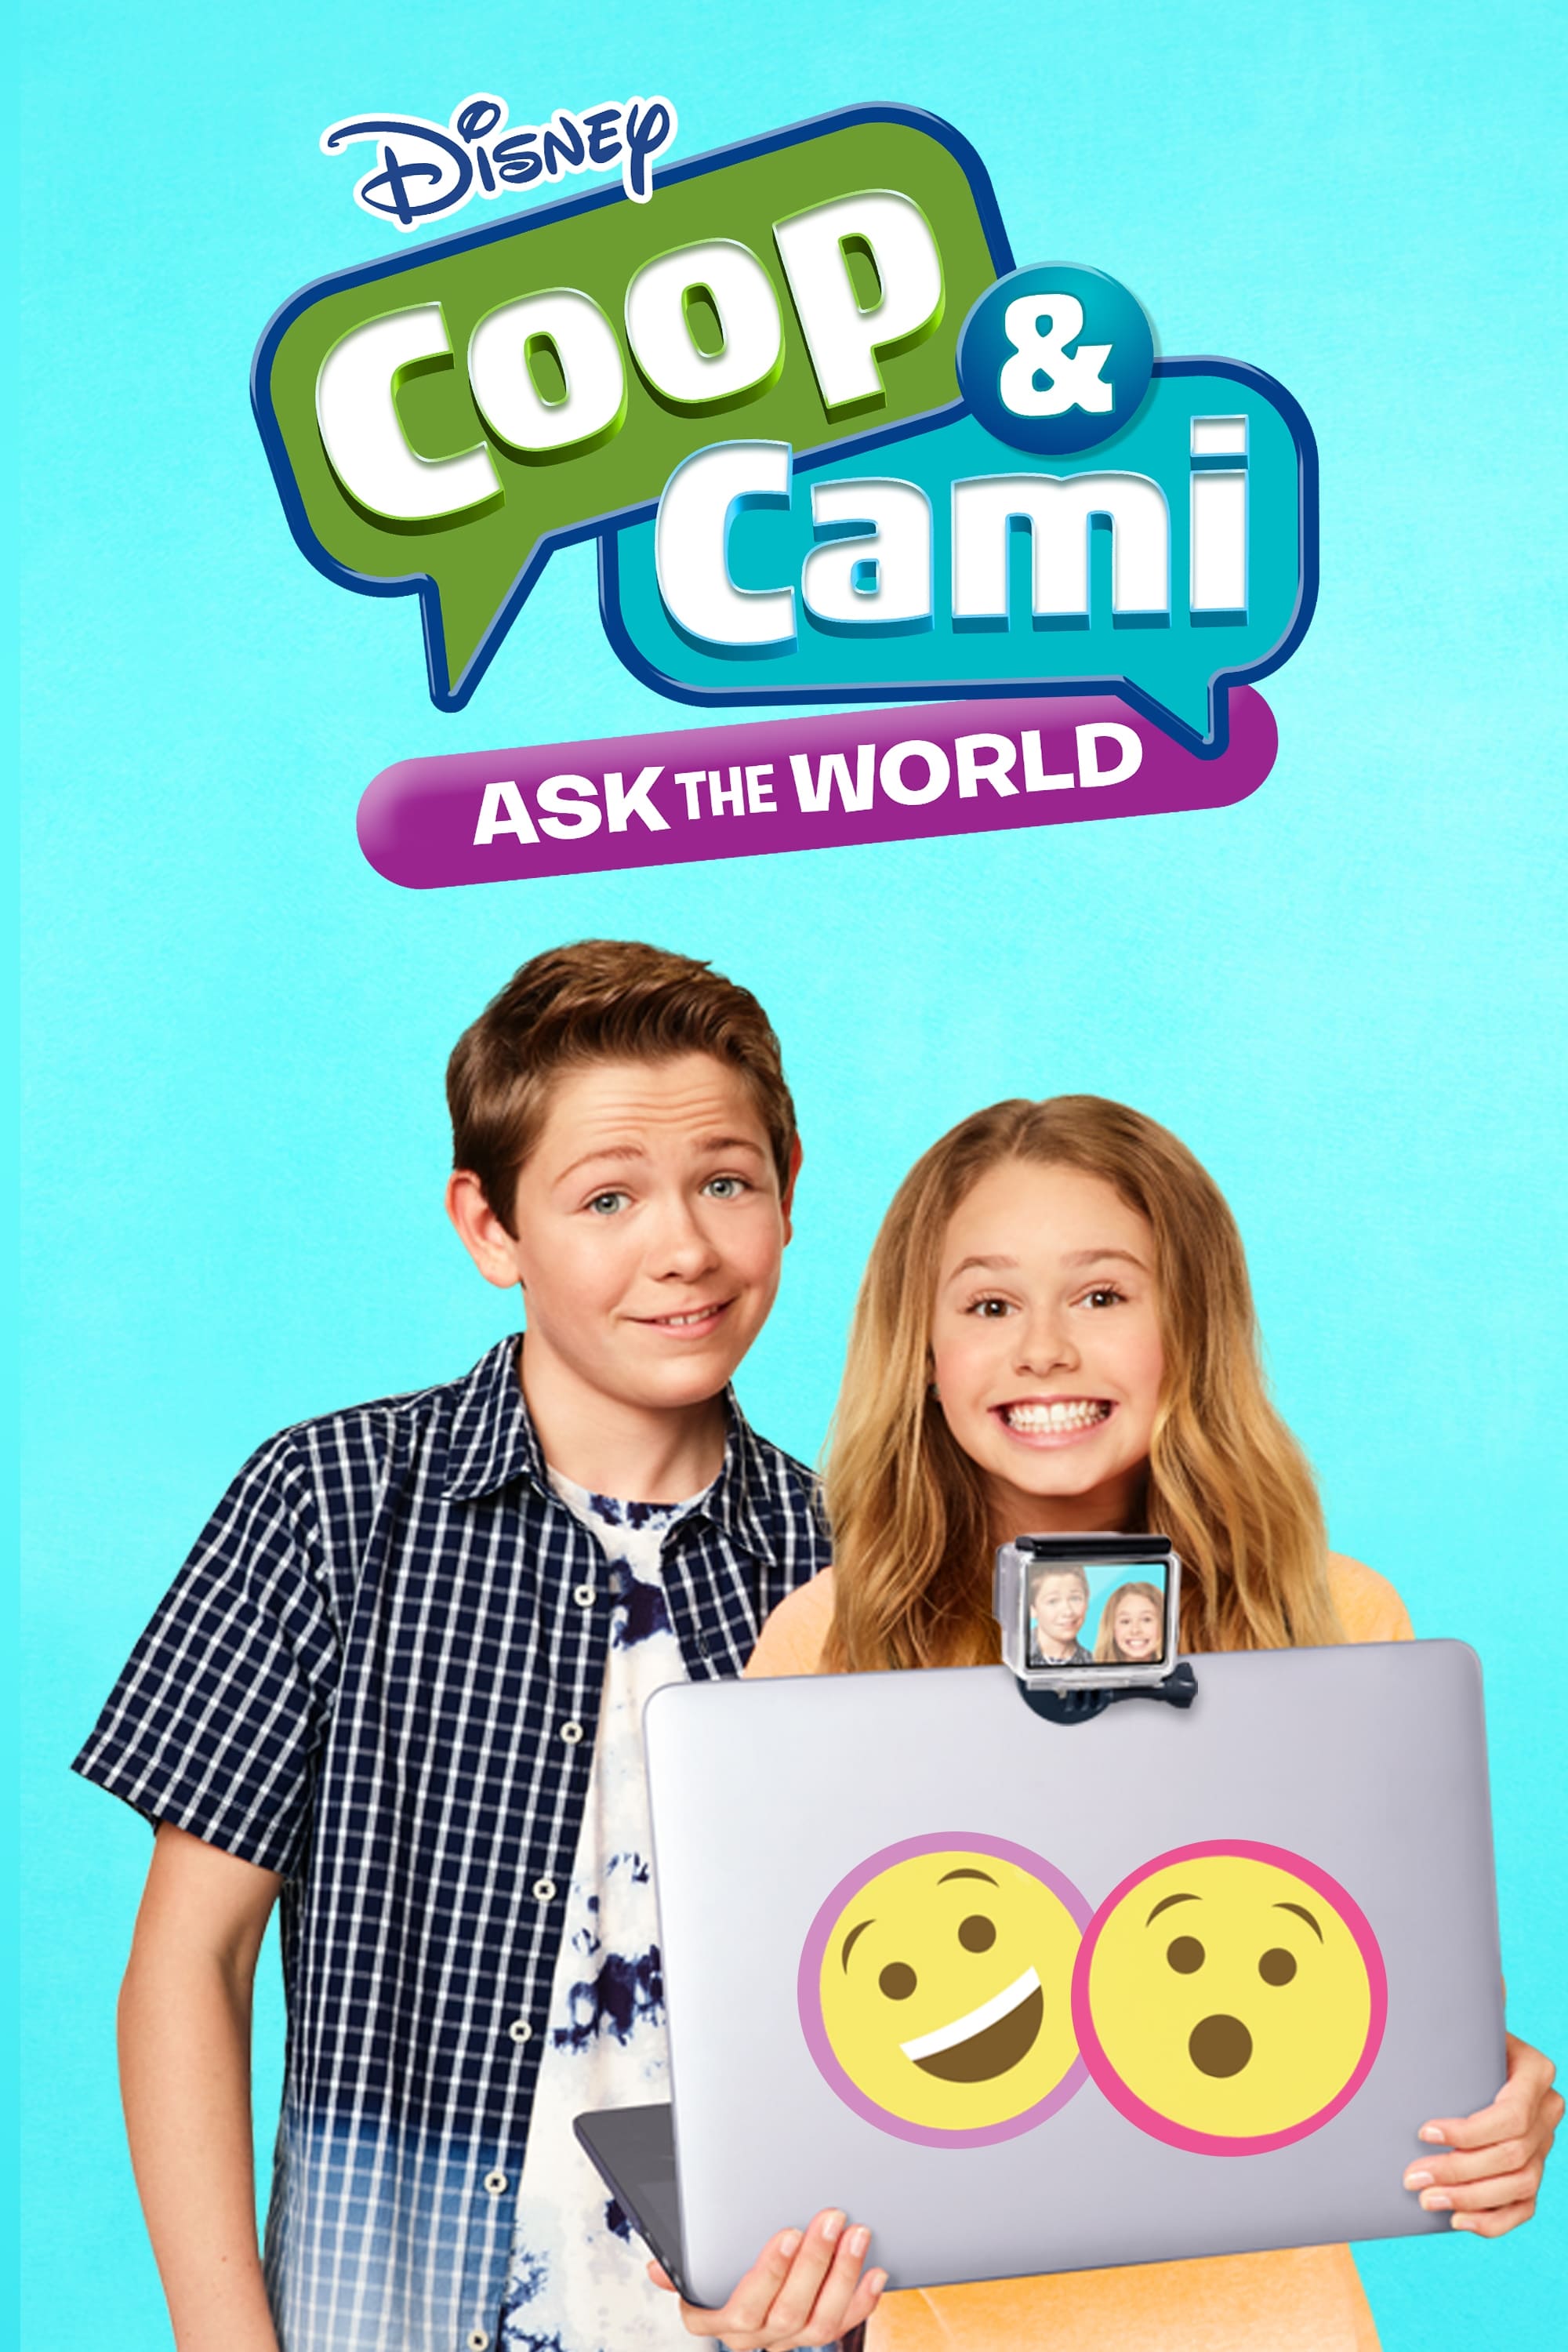 Coop & Cami Ask The World (2018)